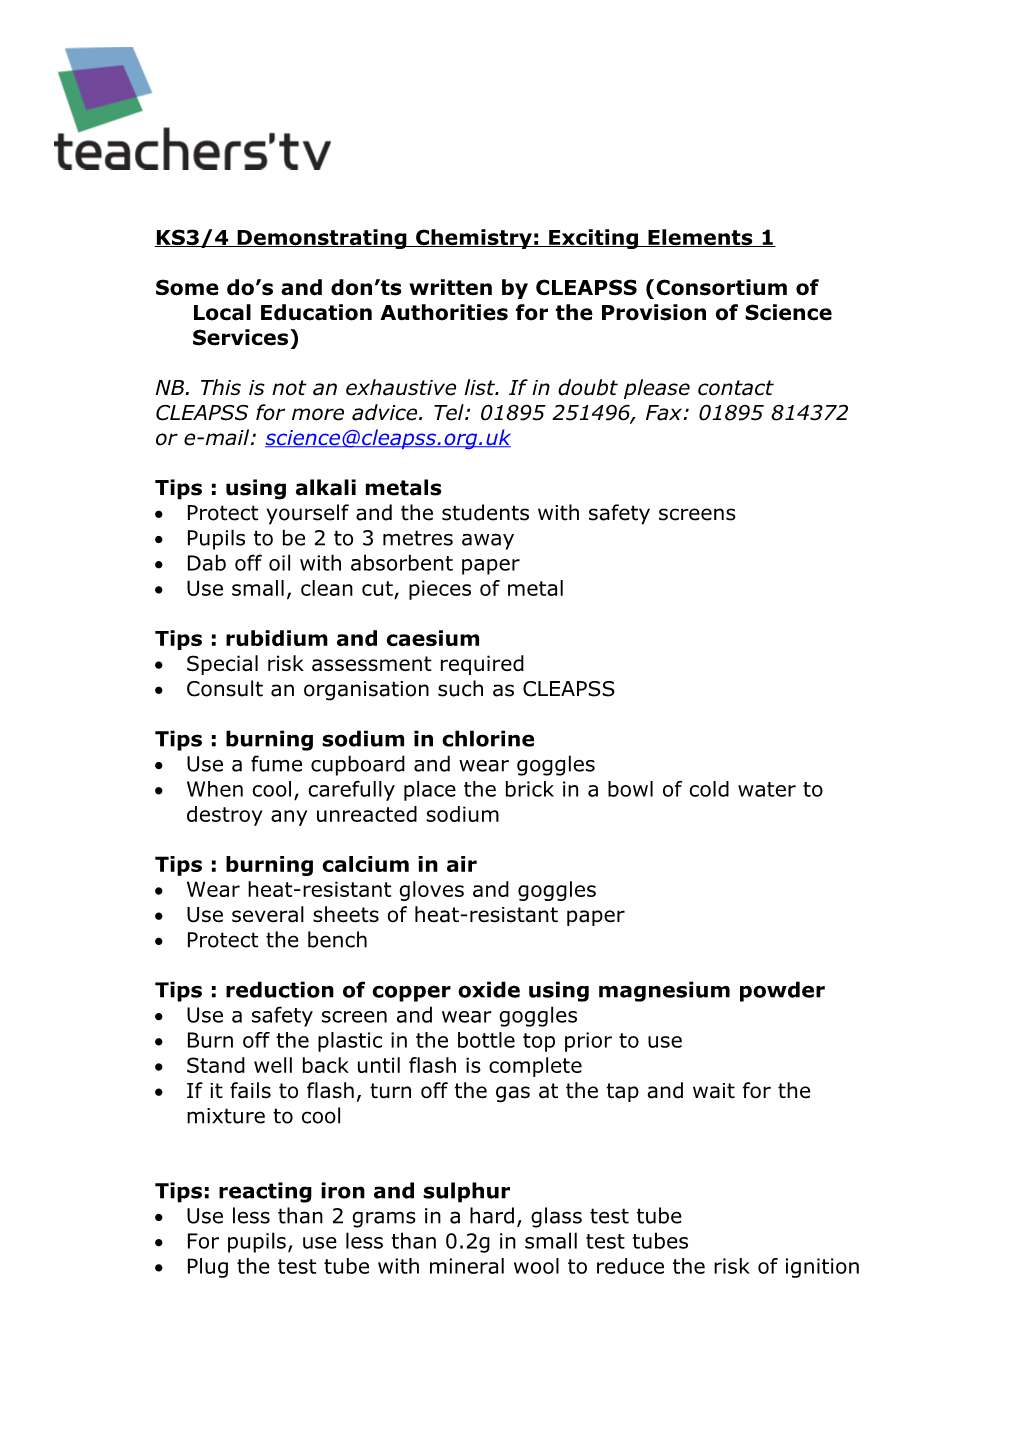 KS3/4 Demonstrating Chemistry: Exciting Elements 1